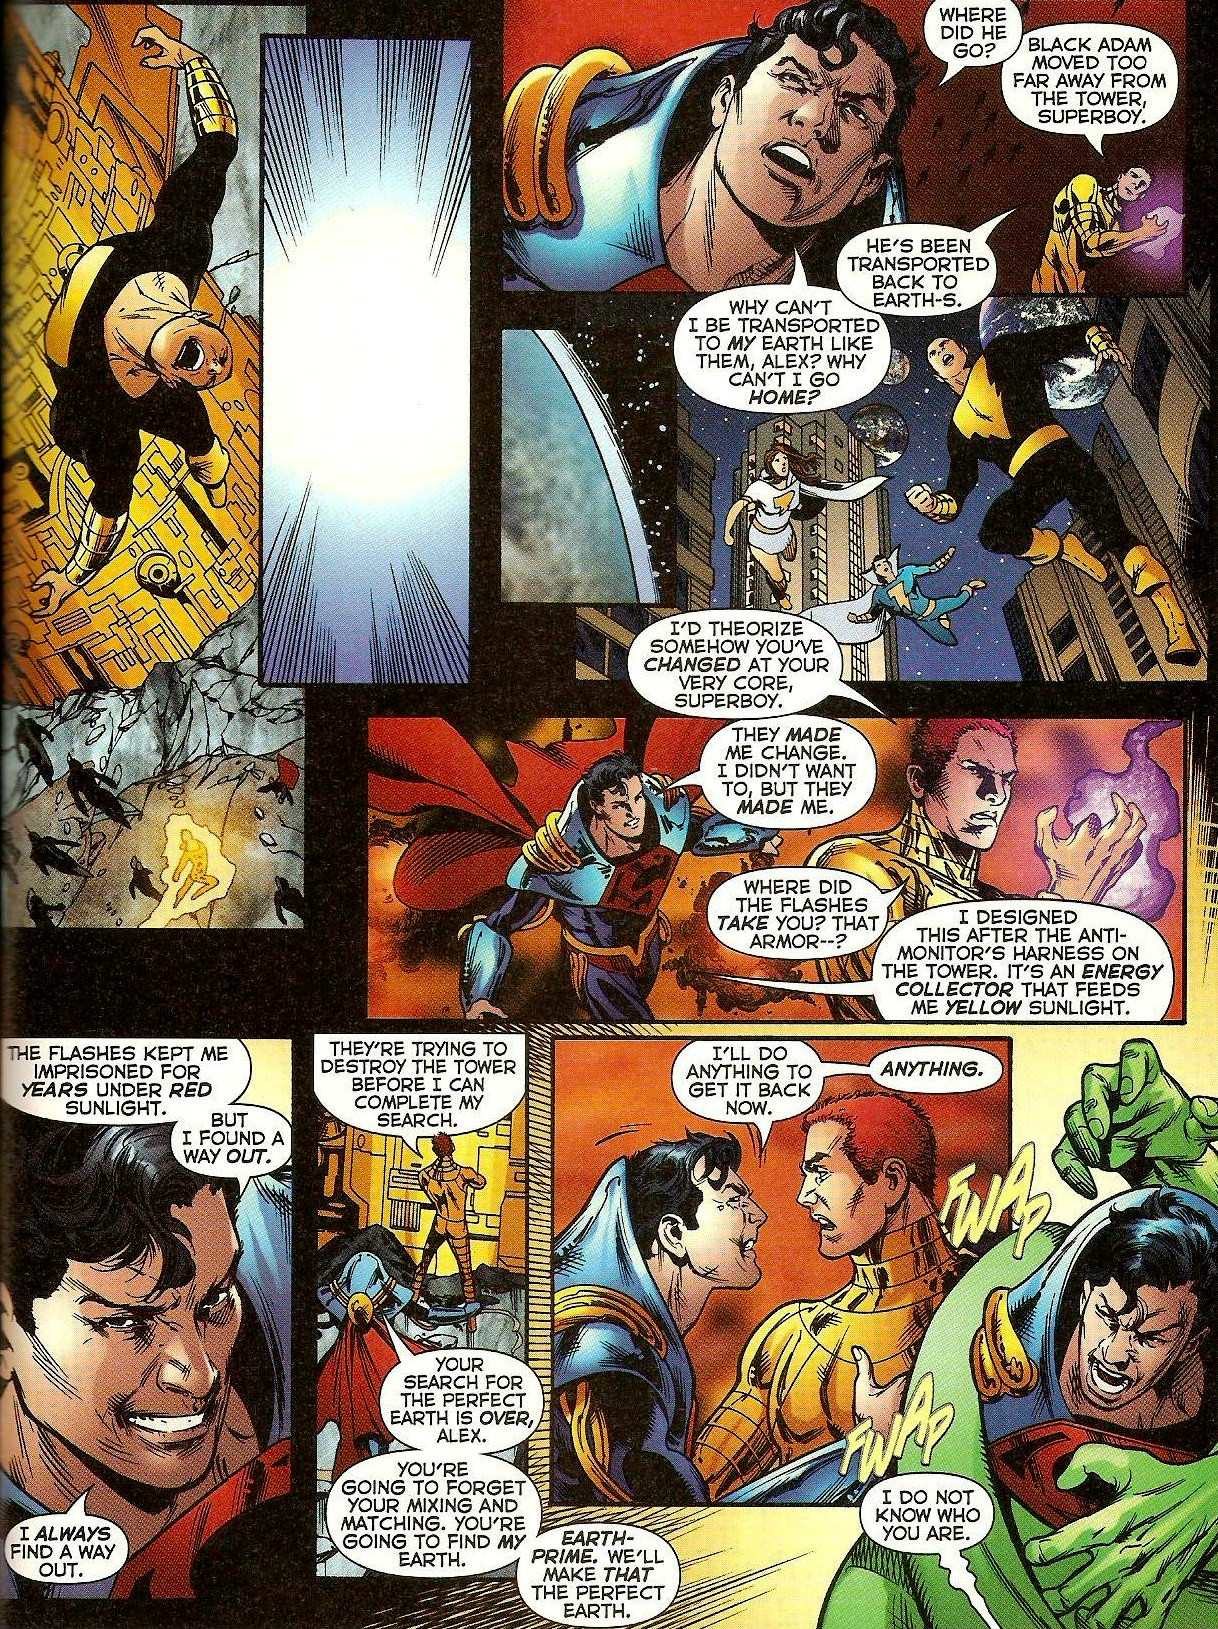 From Infinite Crisis #6 (2006)